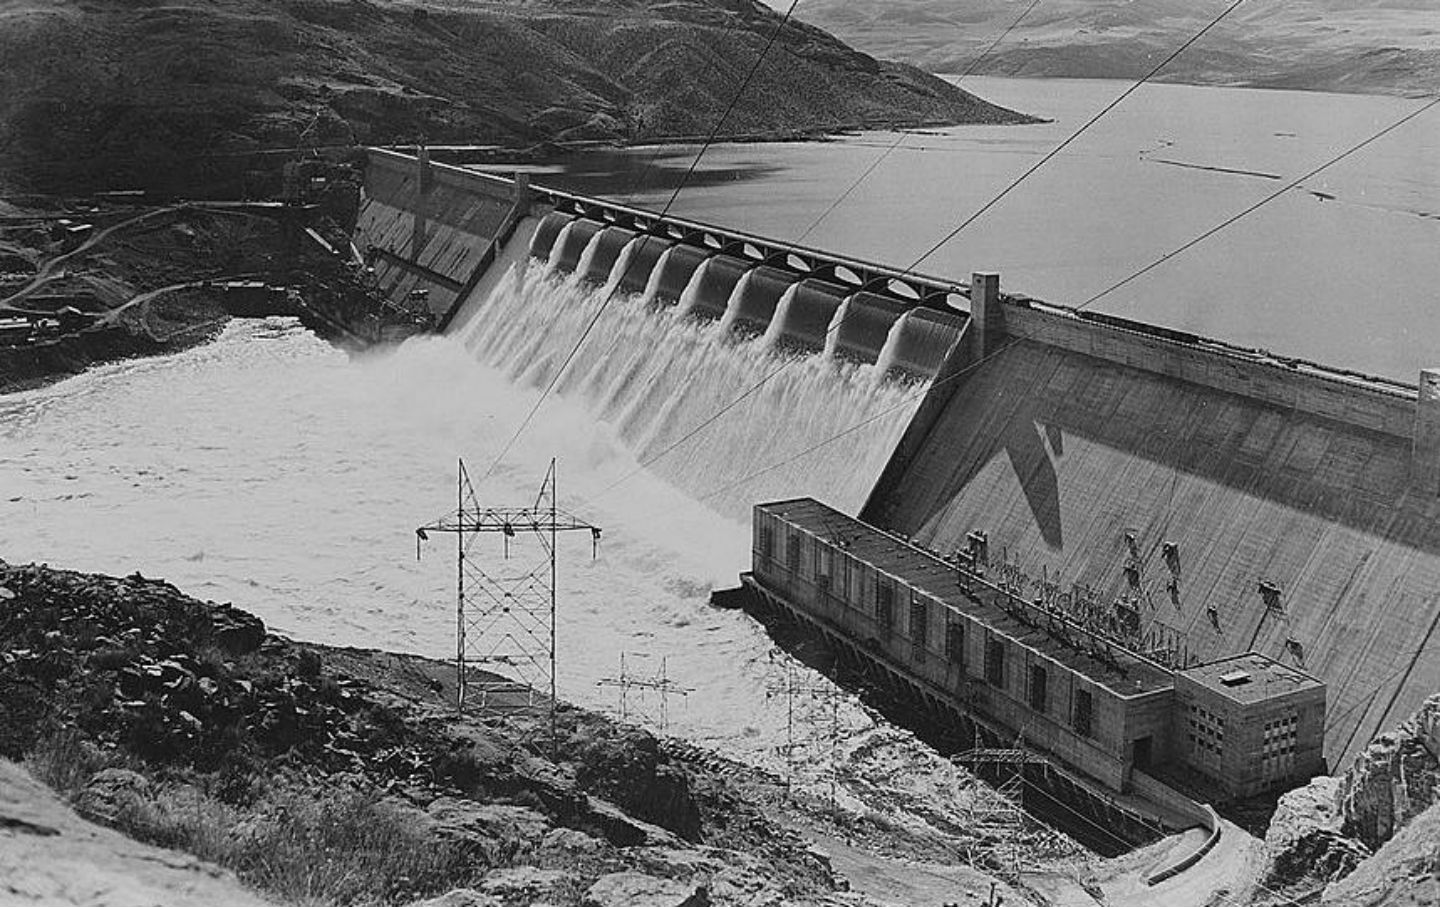 March 22, 1941: The Grand Coulee Dam Opens